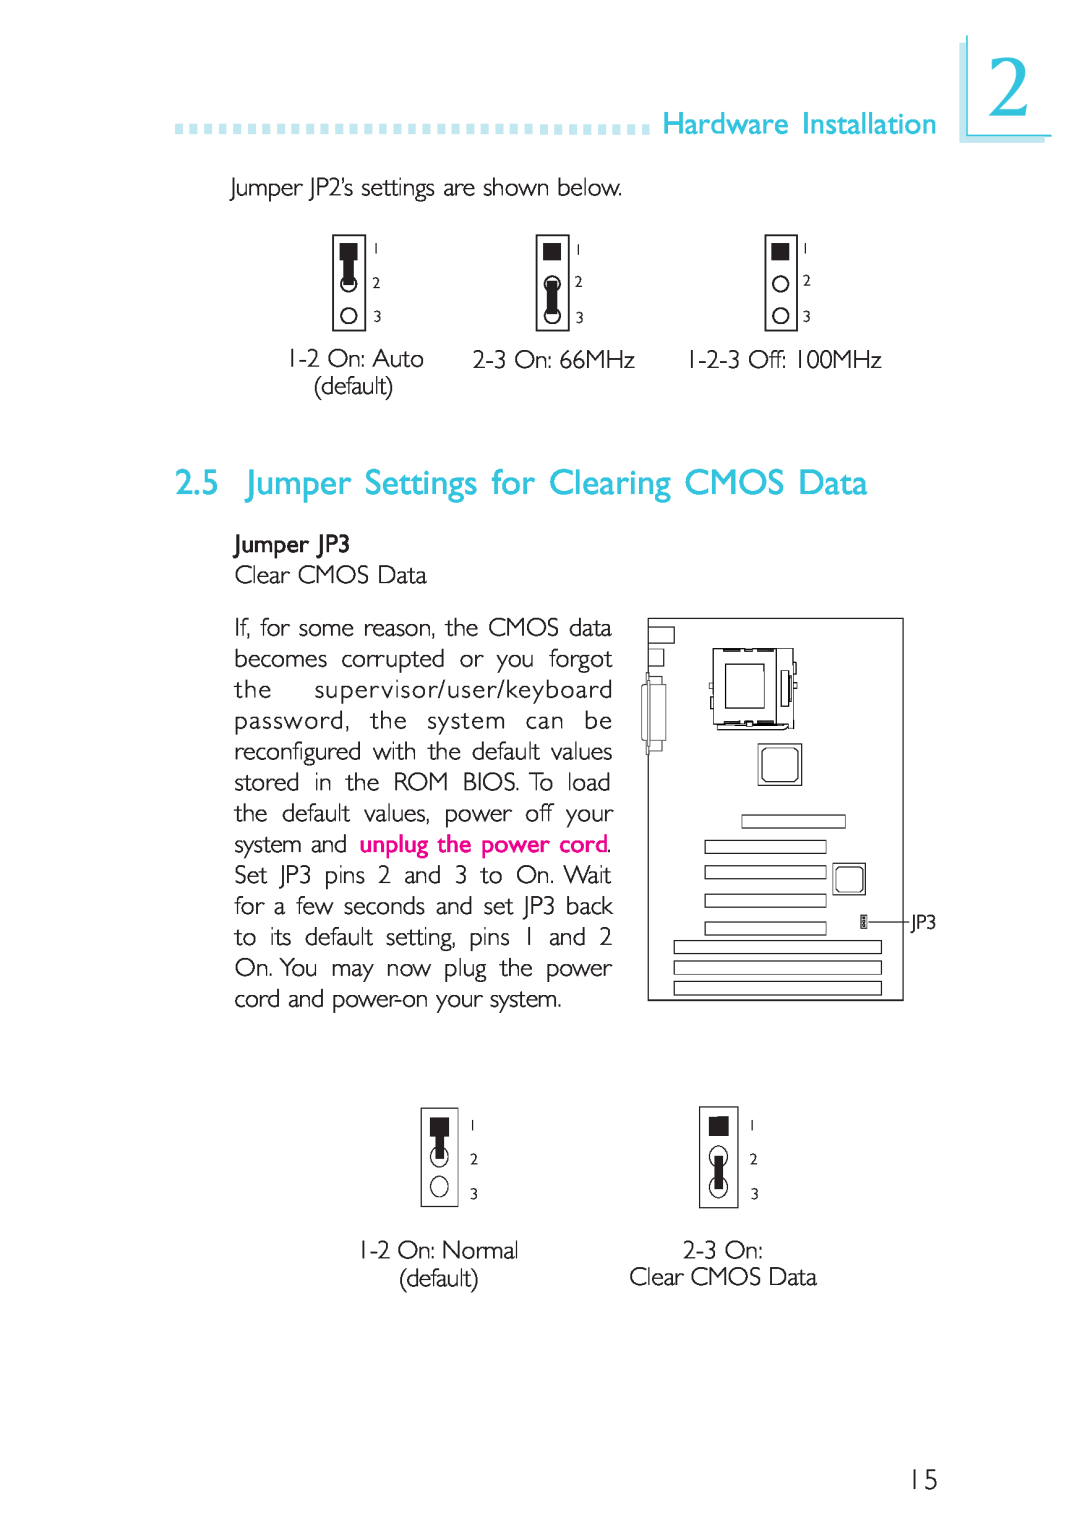 Intel CB60-ZX manual Jumper Settings for Clearing CMOS Data, Hardware Installation, Jumper JP2’s settings are shown below 